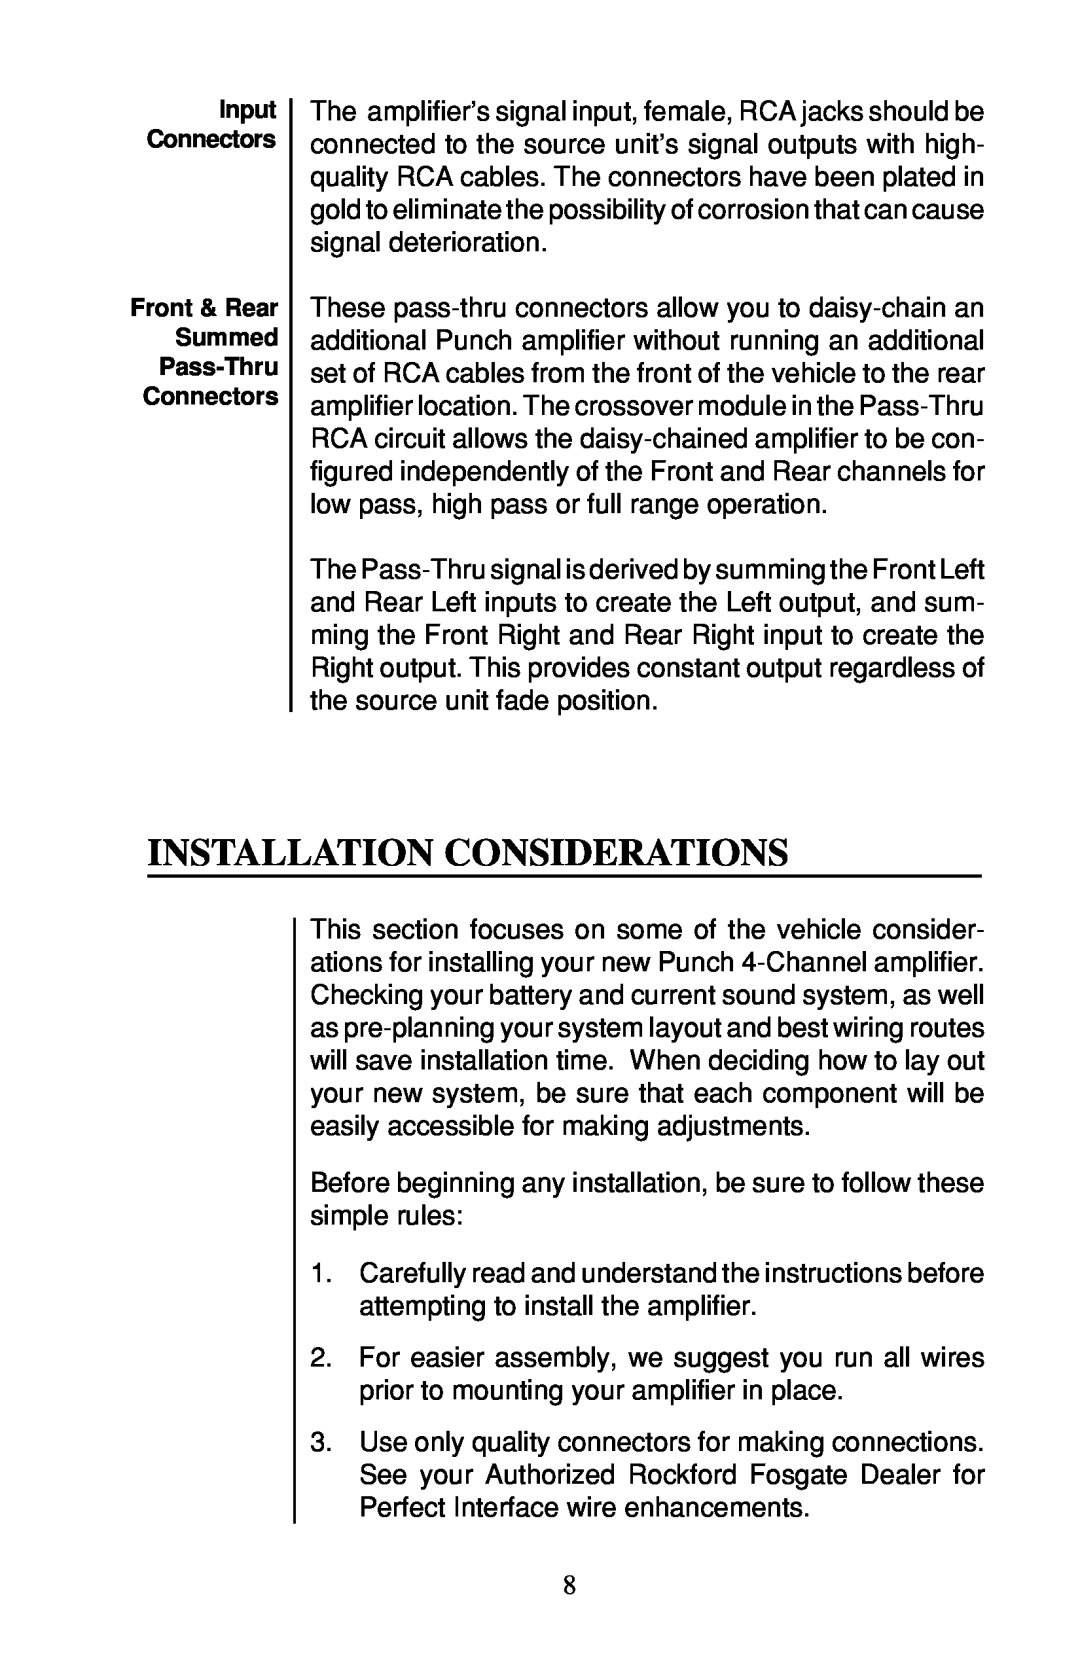 Rockford Fosgate 4-CHANNEL AMPLIFIER owner manual Installation Considerations, Front & Rear Summed Pass-Thru Connectors 